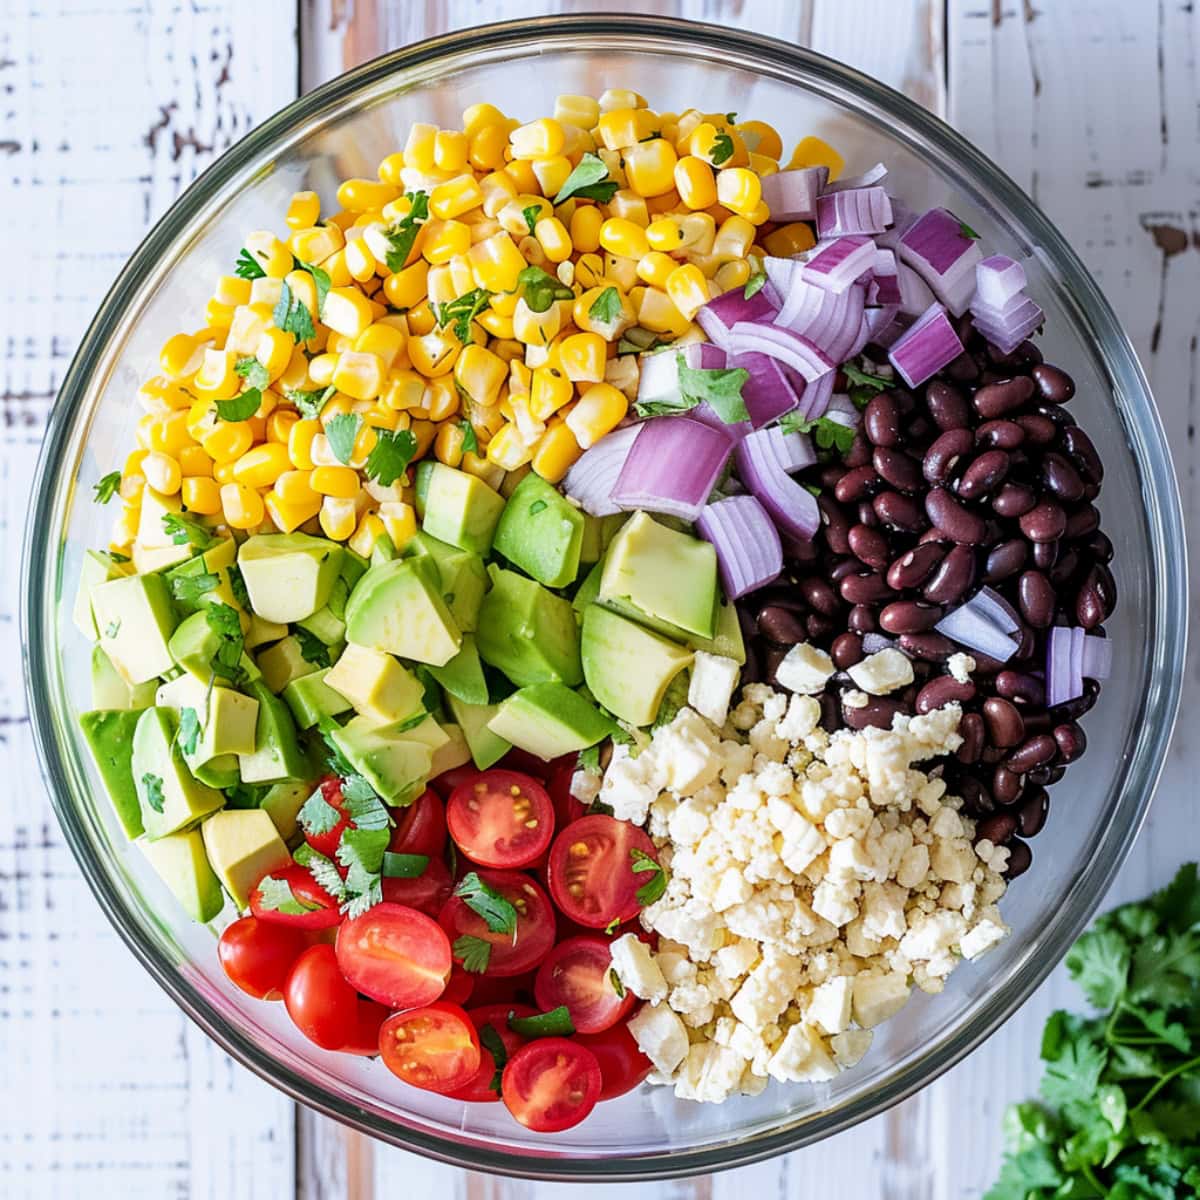 Black beans, corn kernels, red bell pepper diced, diced red onion, cherry tomatoes, jalapeno pepper minced, fresh cilantro chopped, avocado diced, crumbled feta cheese in a glass bowl on a white wooden table.